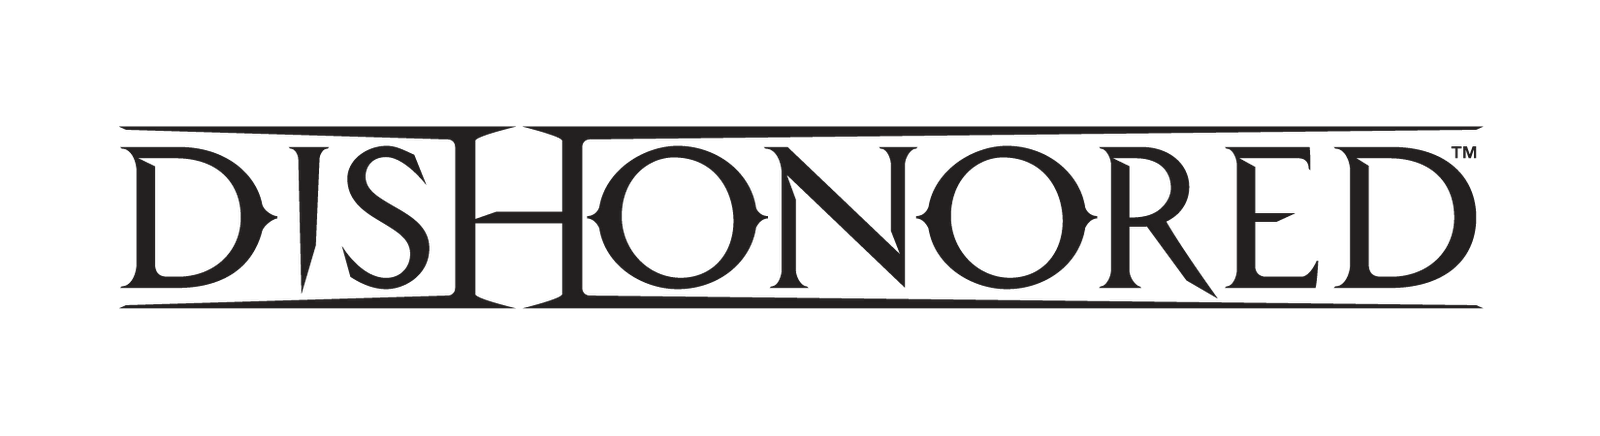 Dishonored Logo Background PNG Image